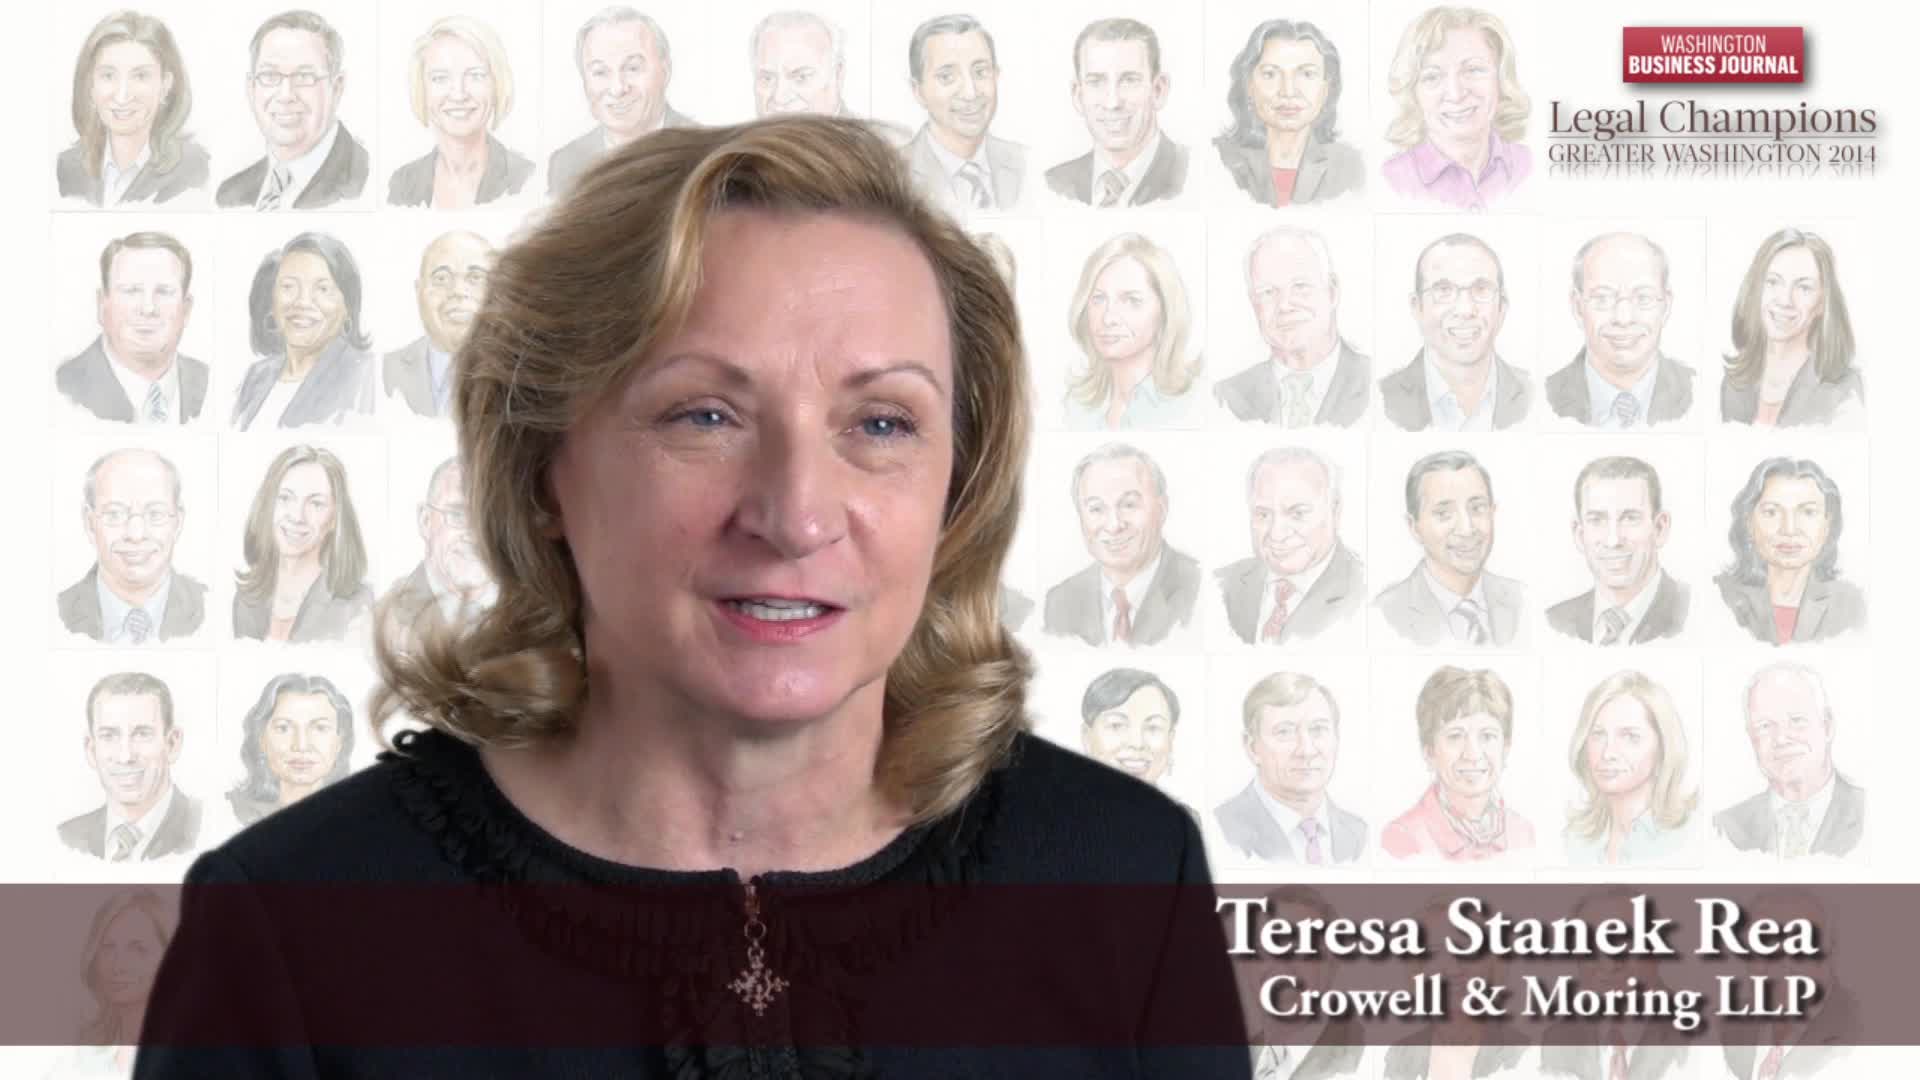 Legal Champions 2014: What's the toughest aspect of being a lawyer? (Video)